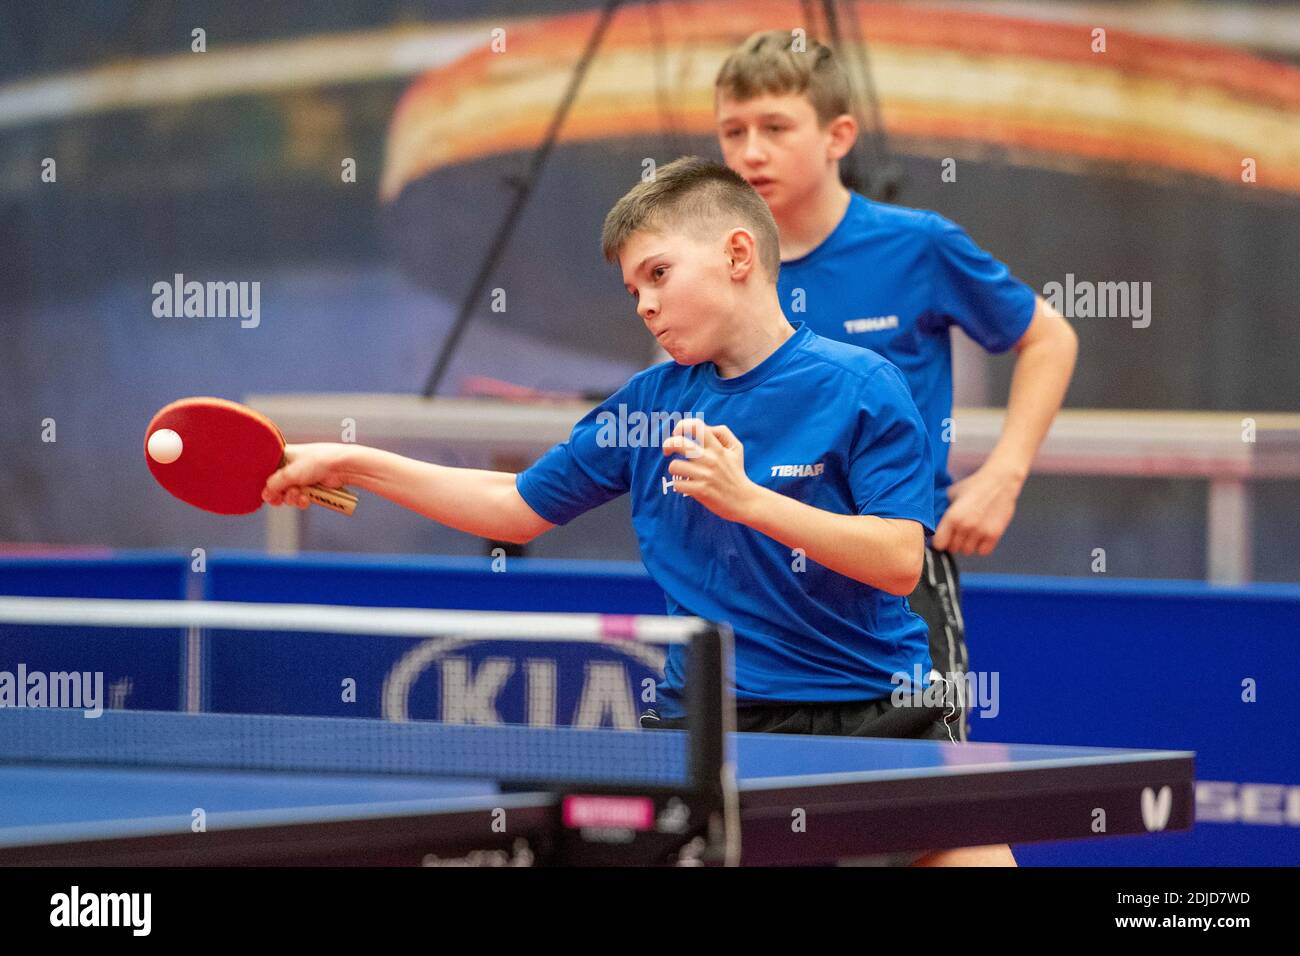 Julian RZIHAUSCHEK (hi., AUT) and Petr HODIN (CZE) are at the age of twelve the youngest players who have ever been nominated for the Champiuonsleague, warm-up, action, preliminary round, table tennis, 1. FC Saarbruecken TT (GER) - SPG Walter Wels (AUT), Table Tennis Champions League Men 20/21 in Duesseldorf on December 11th, 2020. Â | usage worldwide Stock Photo